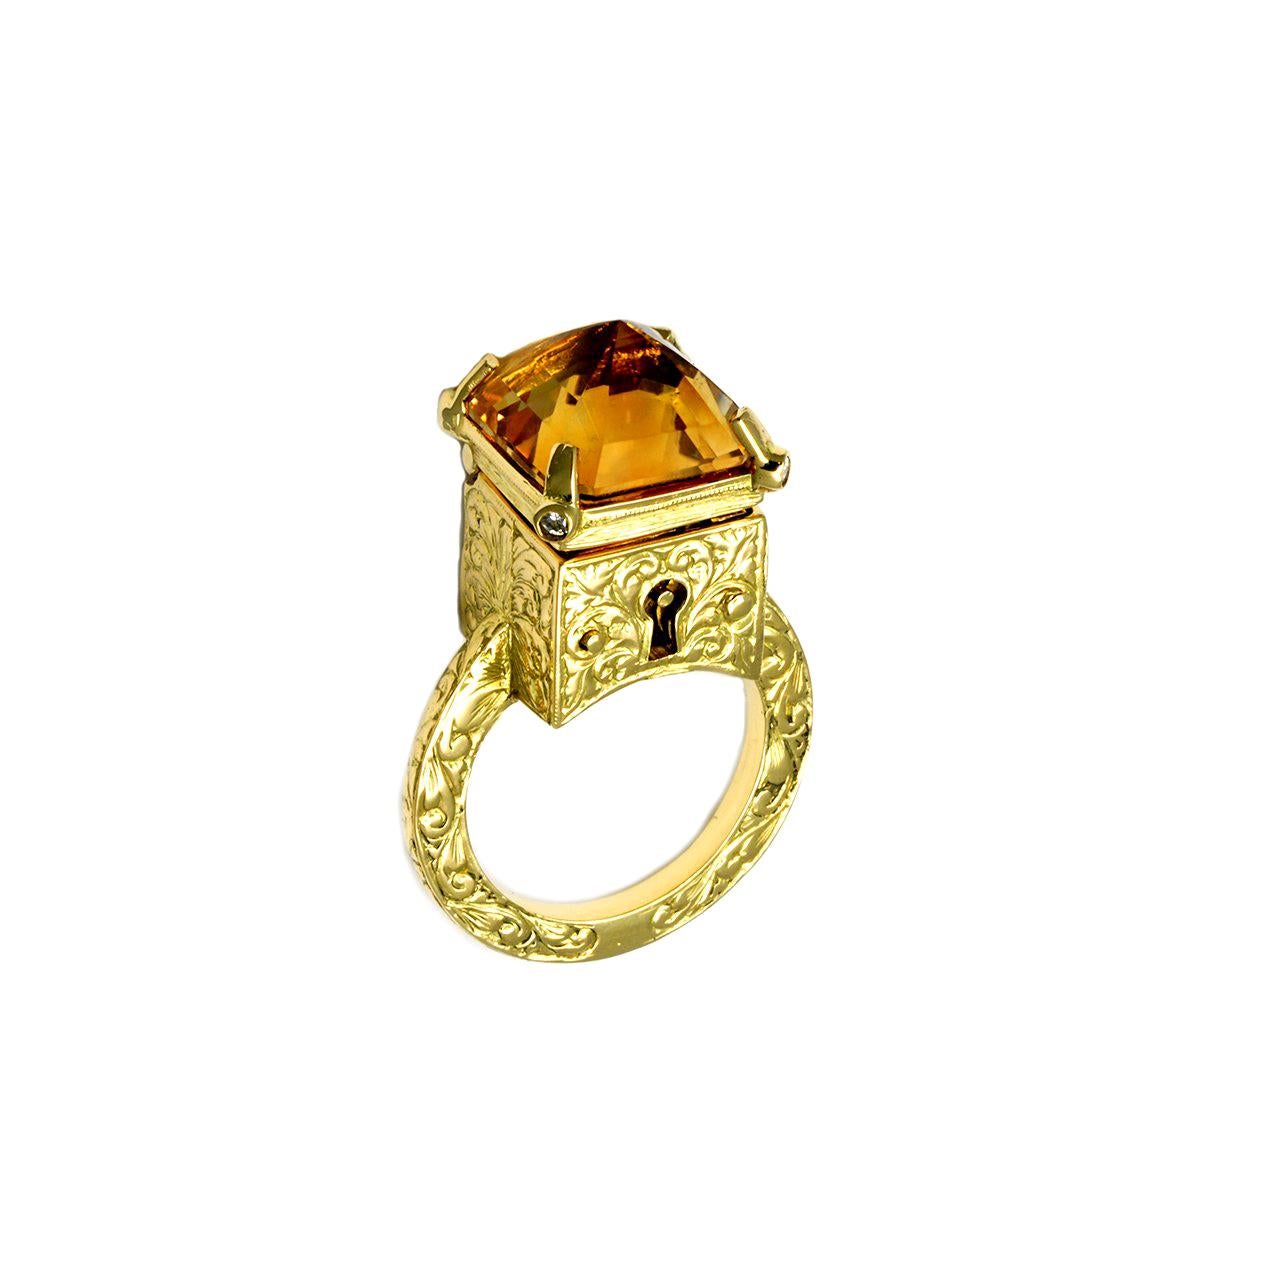 18ct Gold, Citrine and Diamond, Baroque Engraved Victorian Poison Ring with Key